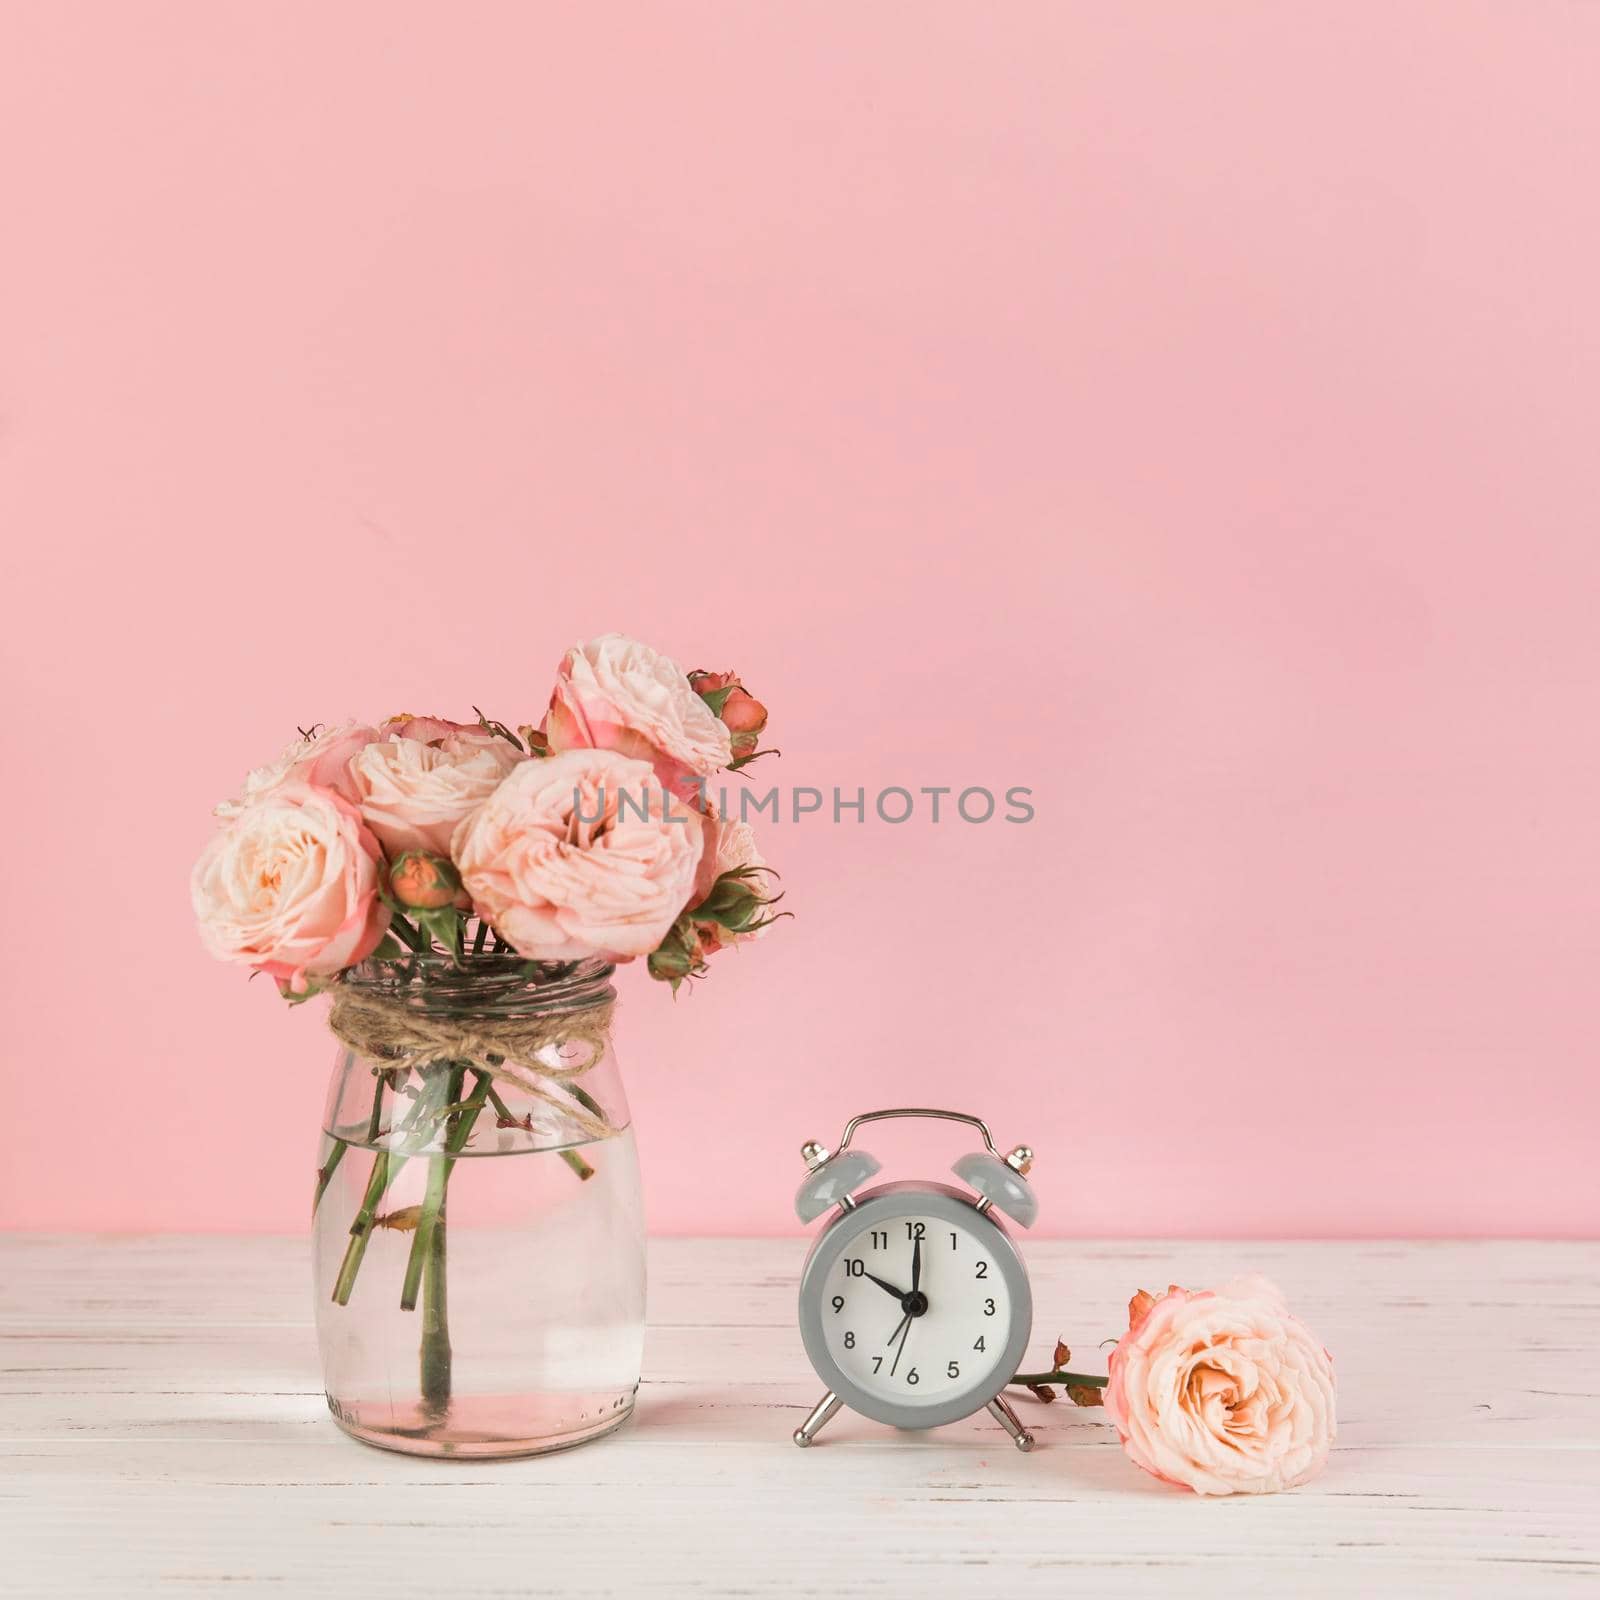 roses vase near alarm clock wooden desk against pink background. High quality photo by Zahard